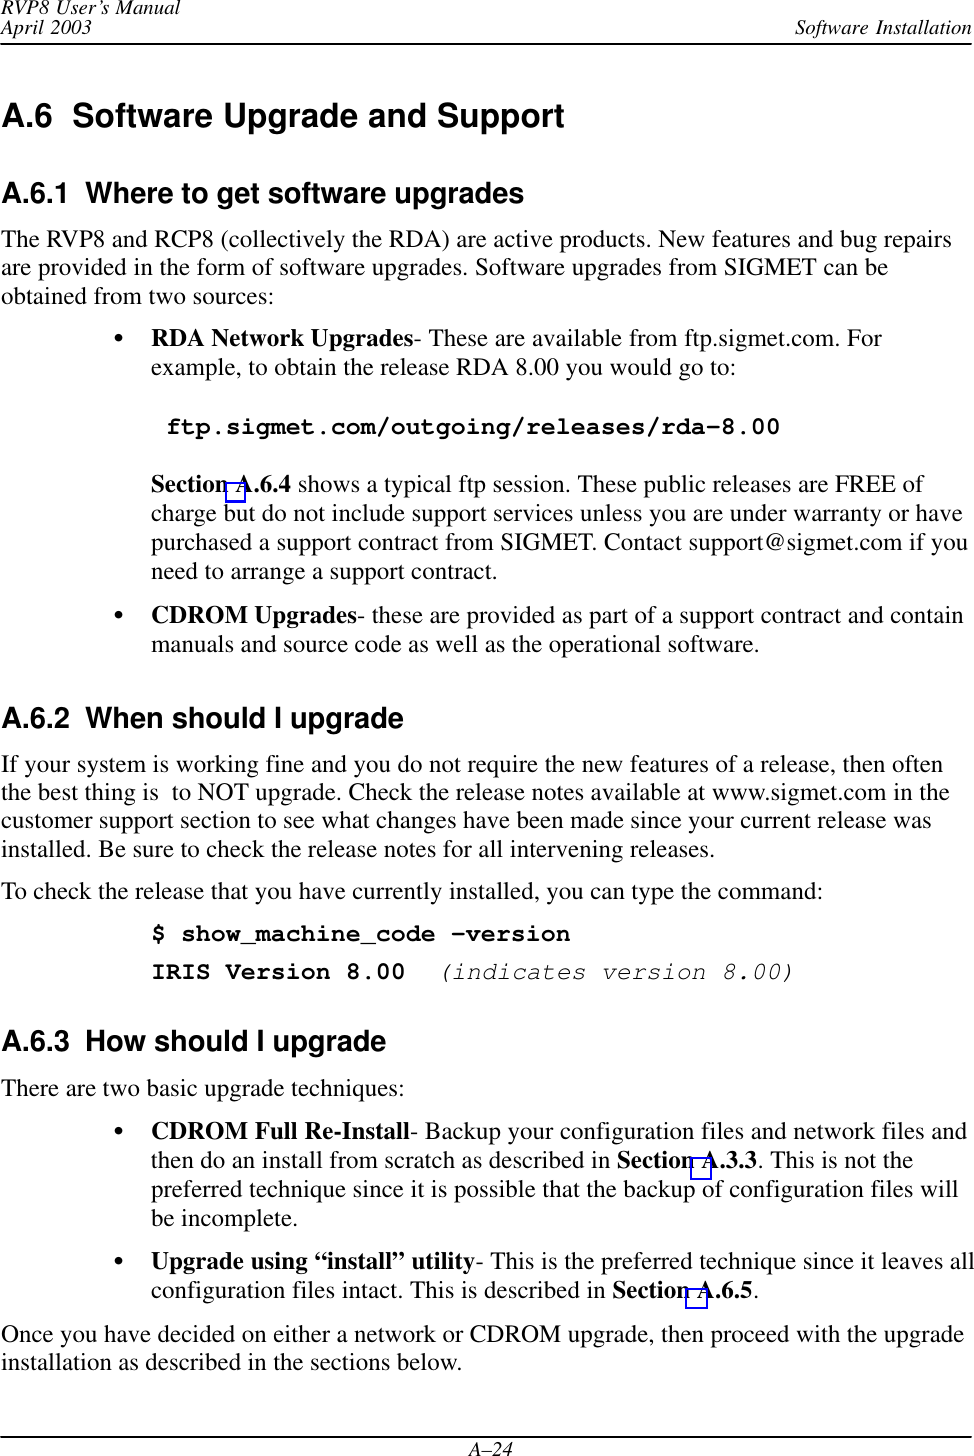 Software InstallationRVP8 User’s ManualApril 2003A–24A.6  Software Upgrade and SupportA.6.1  Where to get software upgradesThe RVP8 and RCP8 (collectively the RDA) are active products. New features and bug repairsare provided in the form of software upgrades. Software upgrades from SIGMET can beobtained from two sources:RDA Network Upgrades- These are available from ftp.sigmet.com. Forexample, to obtain the release RDA 8.00 you would go to: ftp.sigmet.com/outgoing/releases/rda–8.00Section A.6.4 shows a typical ftp session. These public releases are FREE ofcharge but do not include support services unless you are under warranty or havepurchased a support contract from SIGMET. Contact support@sigmet.com if youneed to arrange a support contract.CDROM Upgrades- these are provided as part of a support contract and containmanuals and source code as well as the operational software.A.6.2  When should I upgradeIf your system is working fine and you do not require the new features of a release, then oftenthe best thing is  to NOT upgrade. Check the release notes available at www.sigmet.com in thecustomer support section to see what changes have been made since your current release wasinstalled. Be sure to check the release notes for all intervening releases.To check the release that you have currently installed, you can type the command:$ show_machine_code –versionIRIS Version 8.00  (indicates version 8.00)A.6.3  How should I upgradeThere are two basic upgrade techniques:CDROM Full Re-Install- Backup your configuration files and network files andthen do an install from scratch as described in Section A.3.3. This is not thepreferred technique since it is possible that the backup of configuration files willbe incomplete.Upgrade using “install” utility- This is the preferred technique since it leaves allconfiguration files intact. This is described in Section A.6.5.Once you have decided on either a network or CDROM upgrade, then proceed with the upgradeinstallation as described in the sections below.